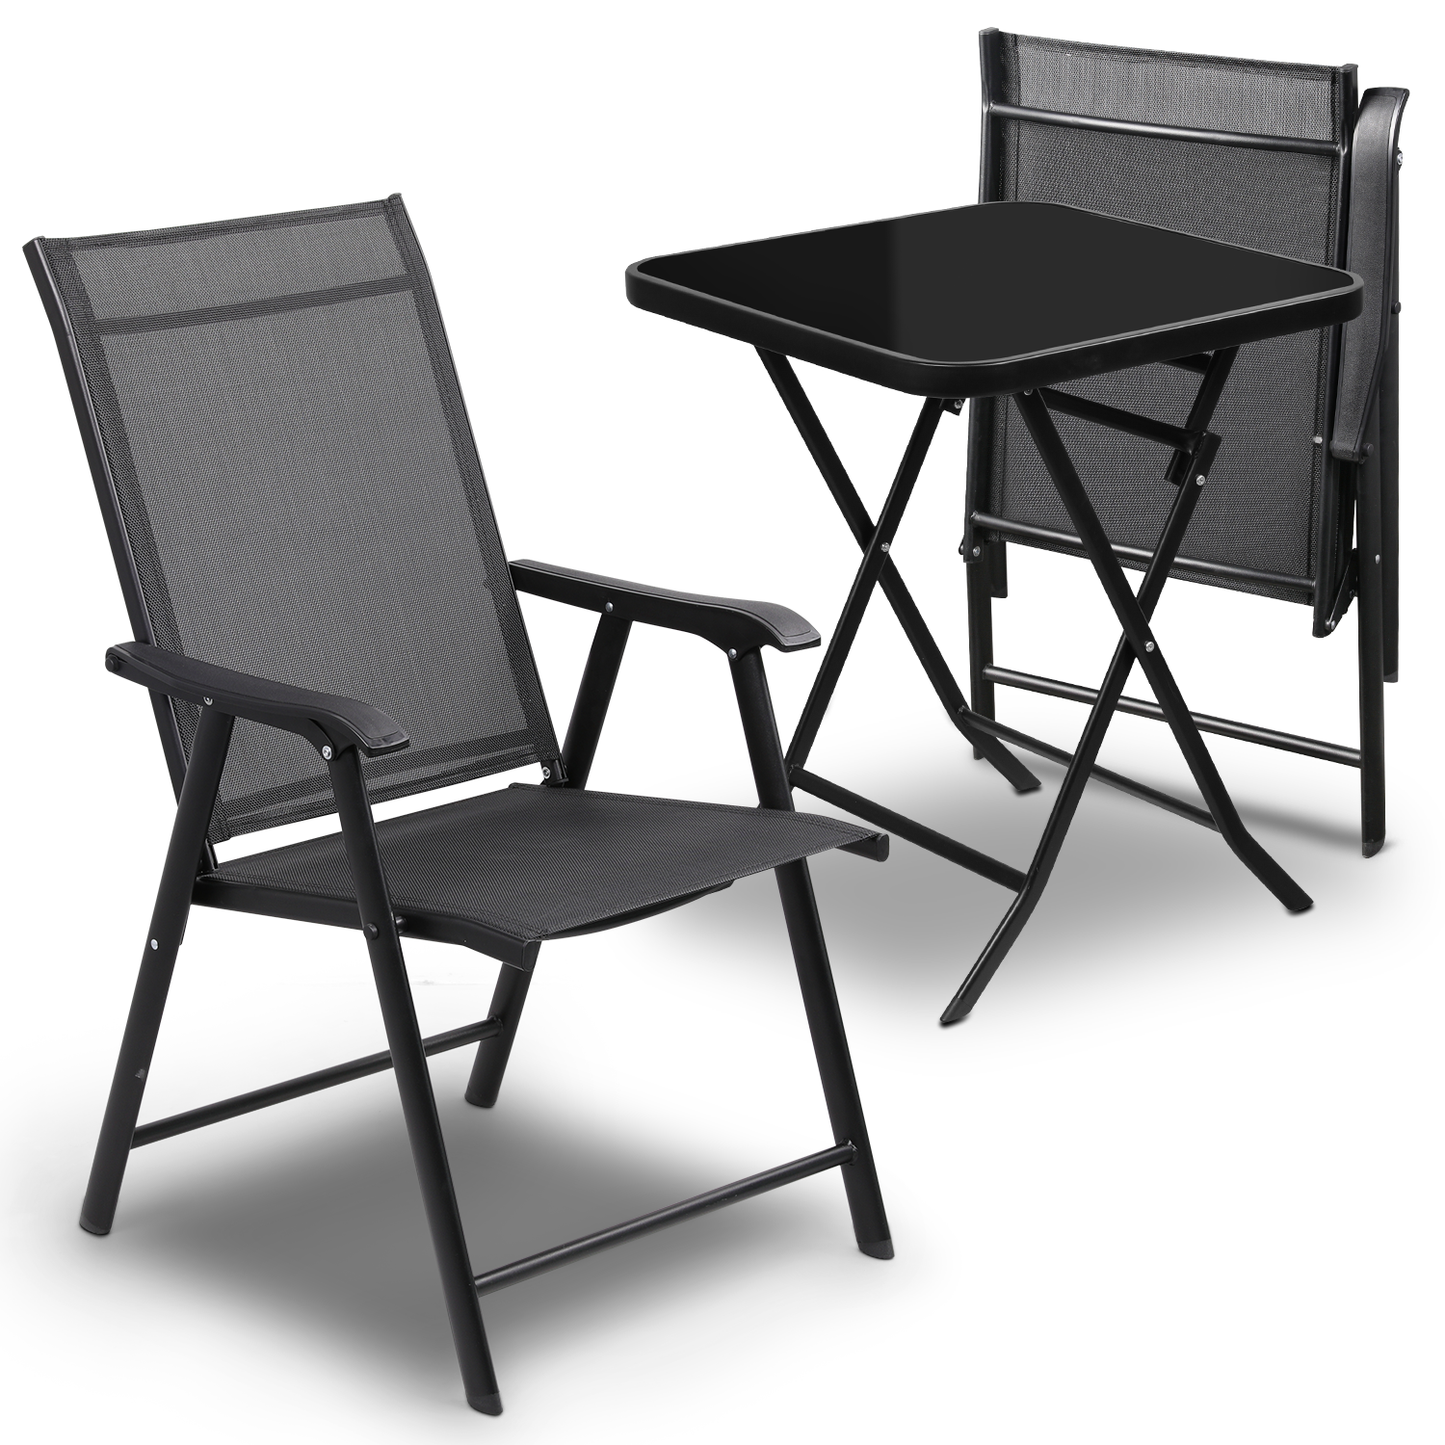 Patio Bistro Set, Tempered Glass Table & 2 Sling Chairs